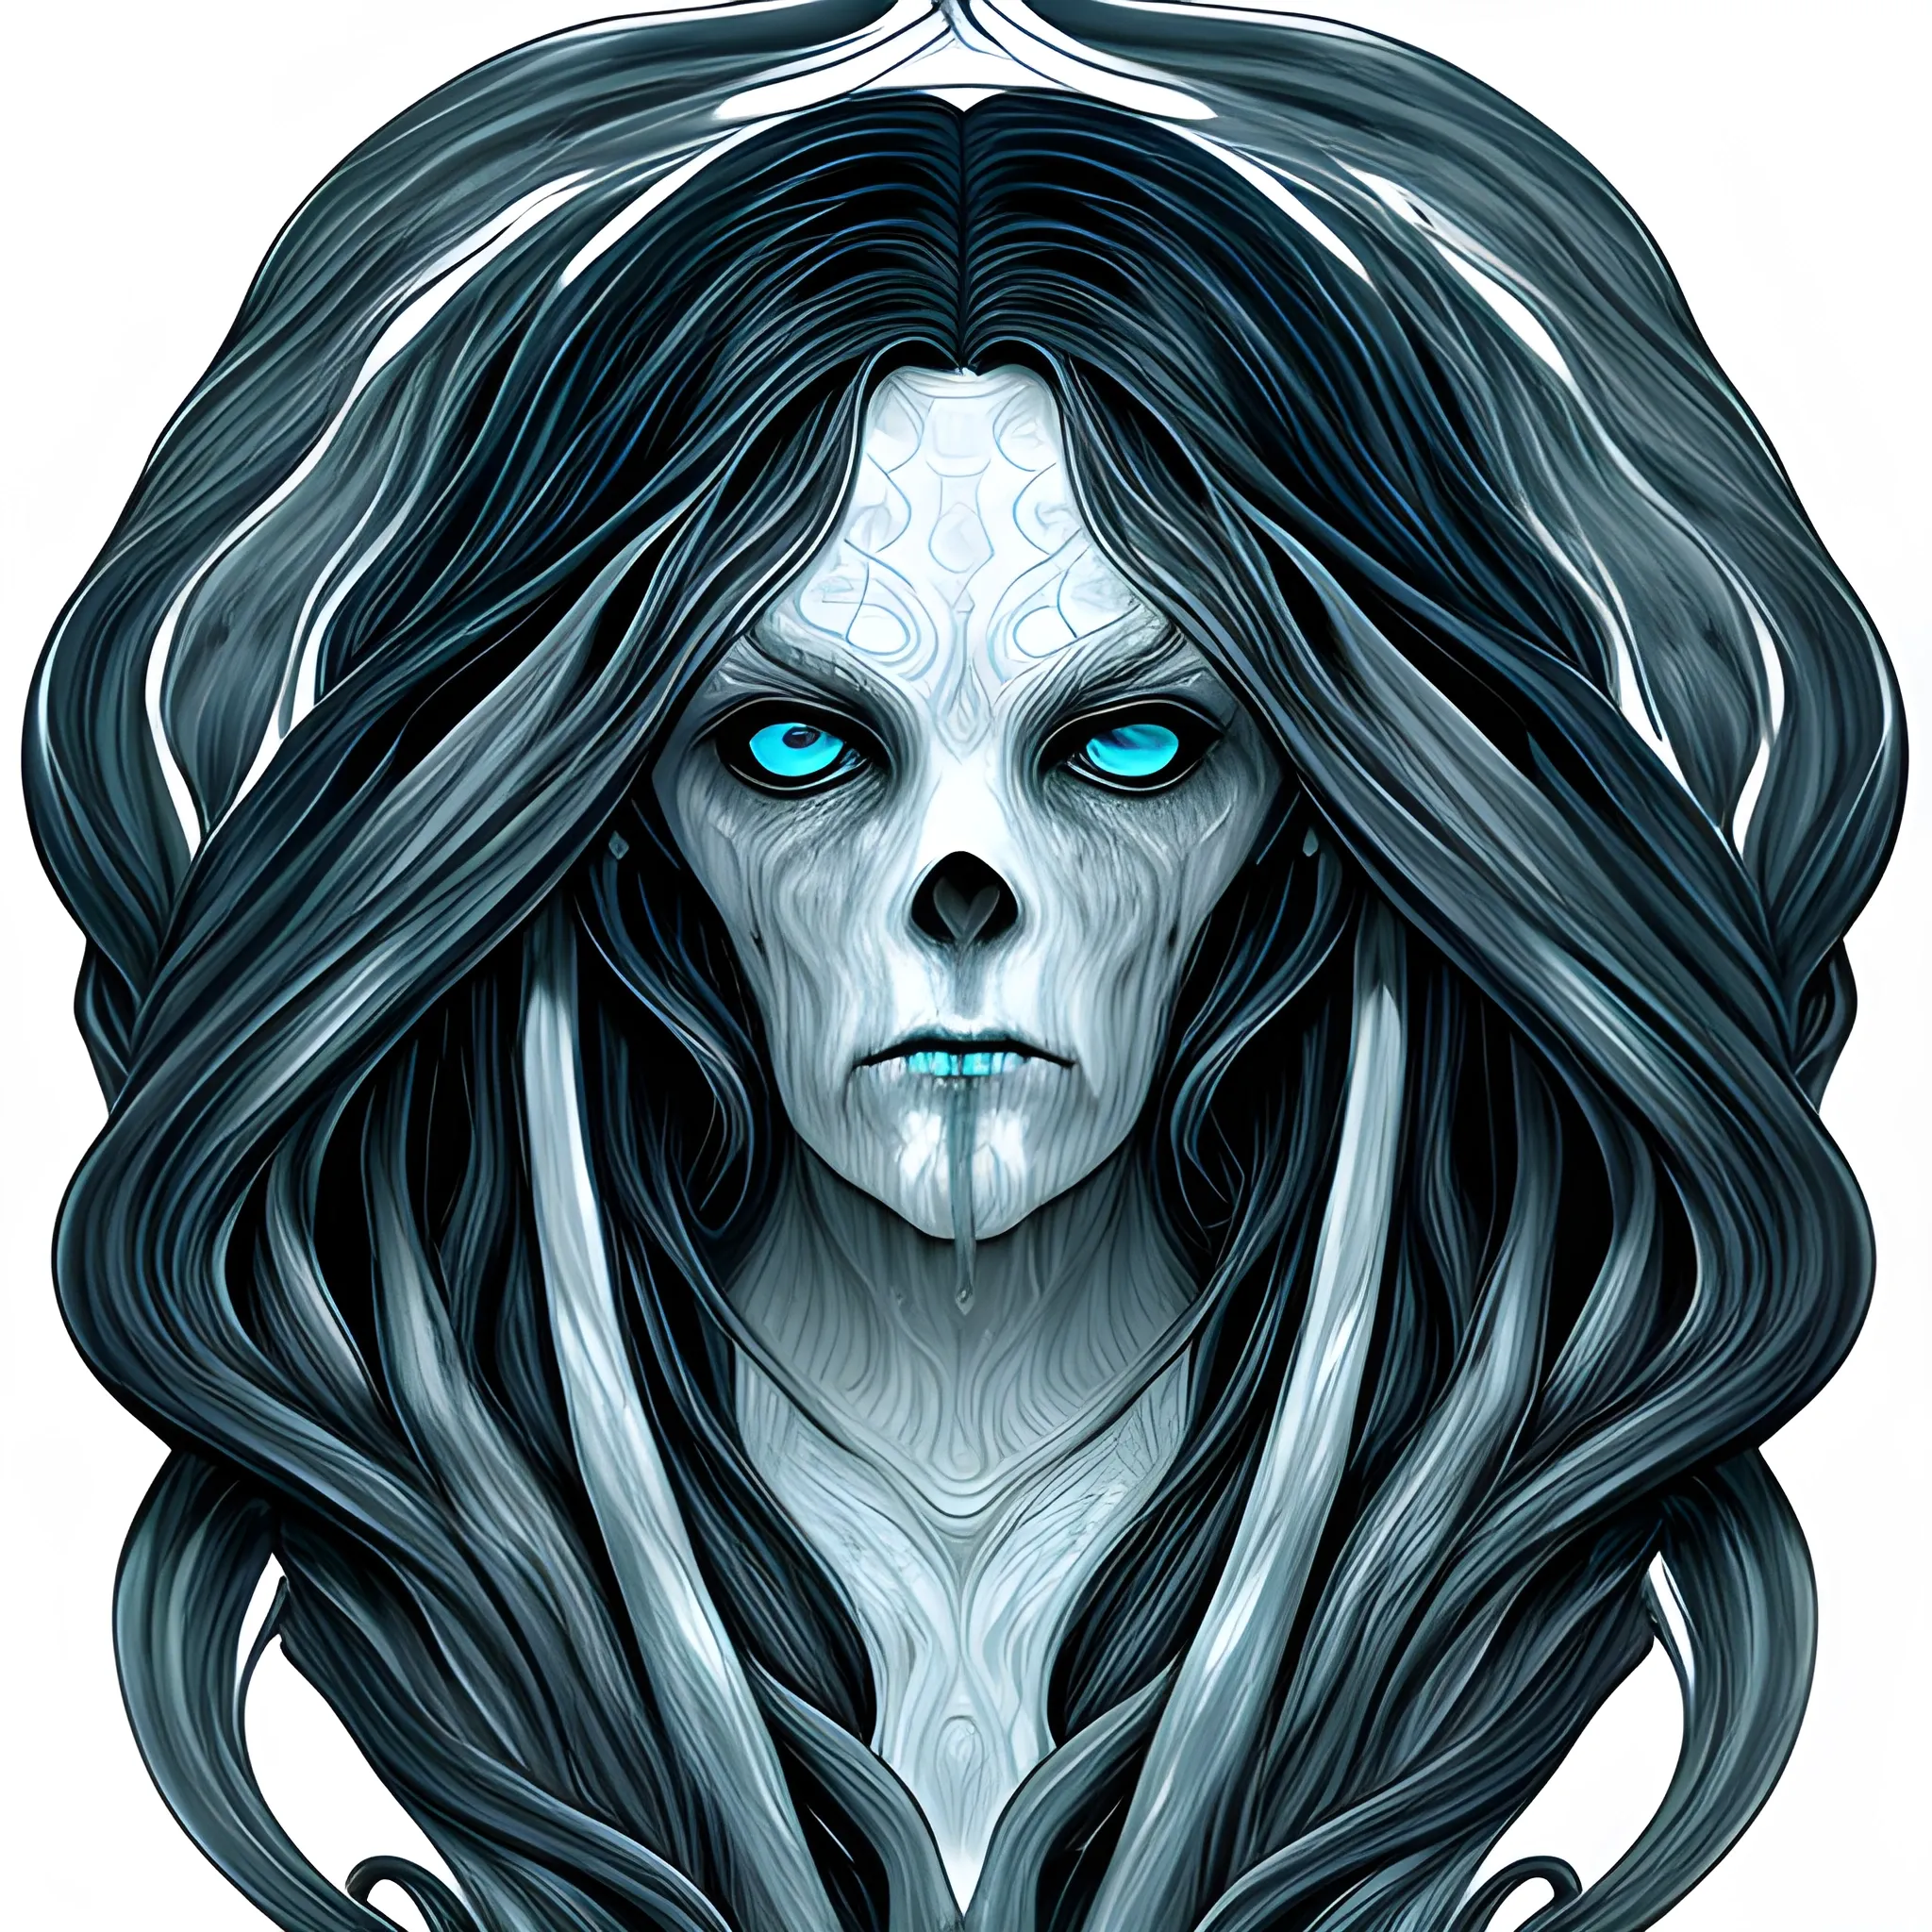 Line art, a pale, tentacled face rising from the inky black depths, with flowing ebony hair and eyes the crystalline blue of the Aegean Sea, its beautiful yet cruel features twisted with divine rage, in the style of fantasy art